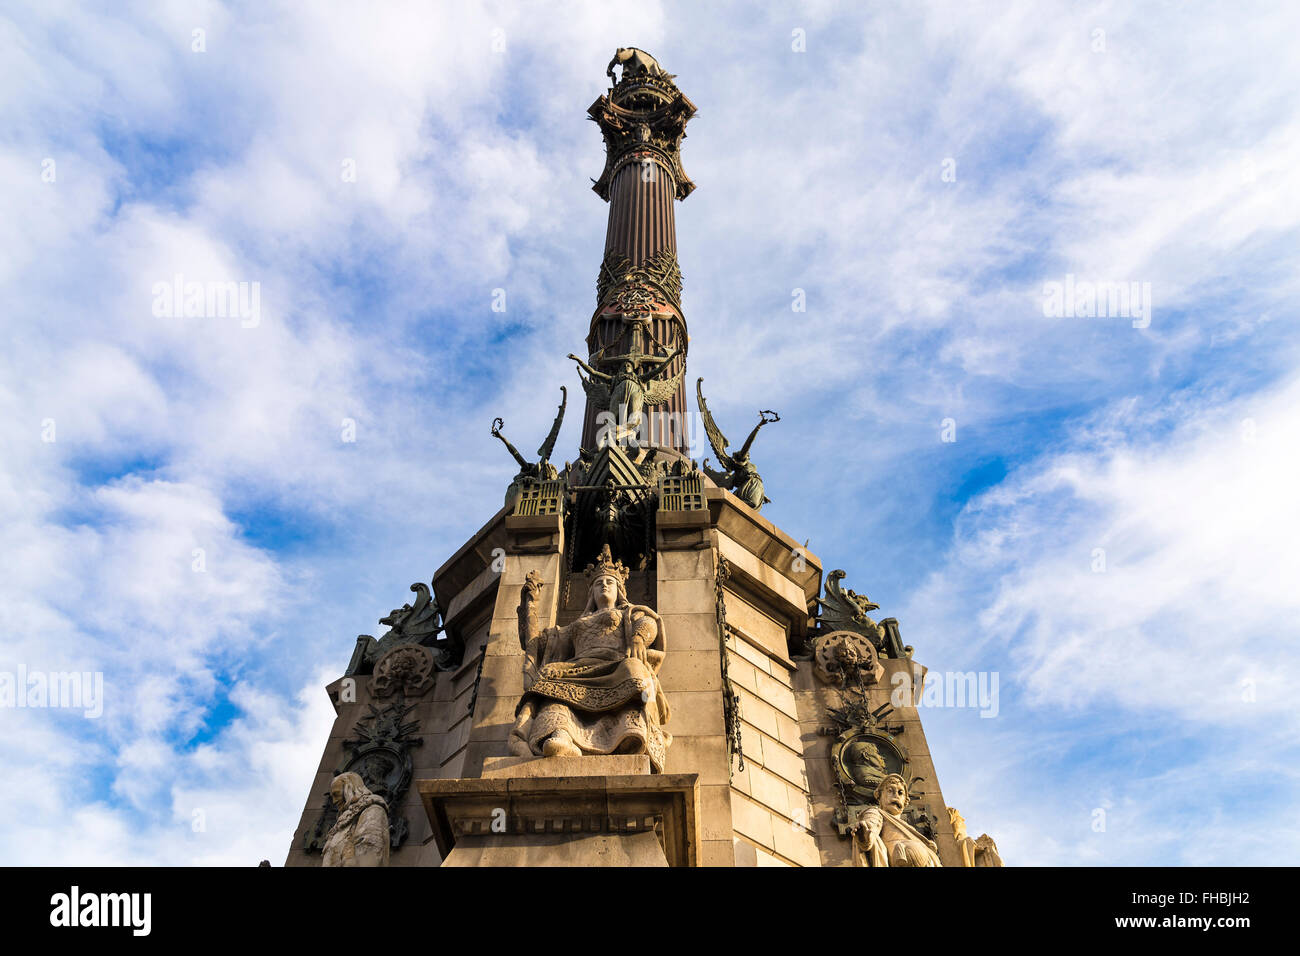 The Columbus Monument is a 60 meter tall monument to Christopher Columbus at the lower end of La Rambla, Barcelona, Spain Stock Photo